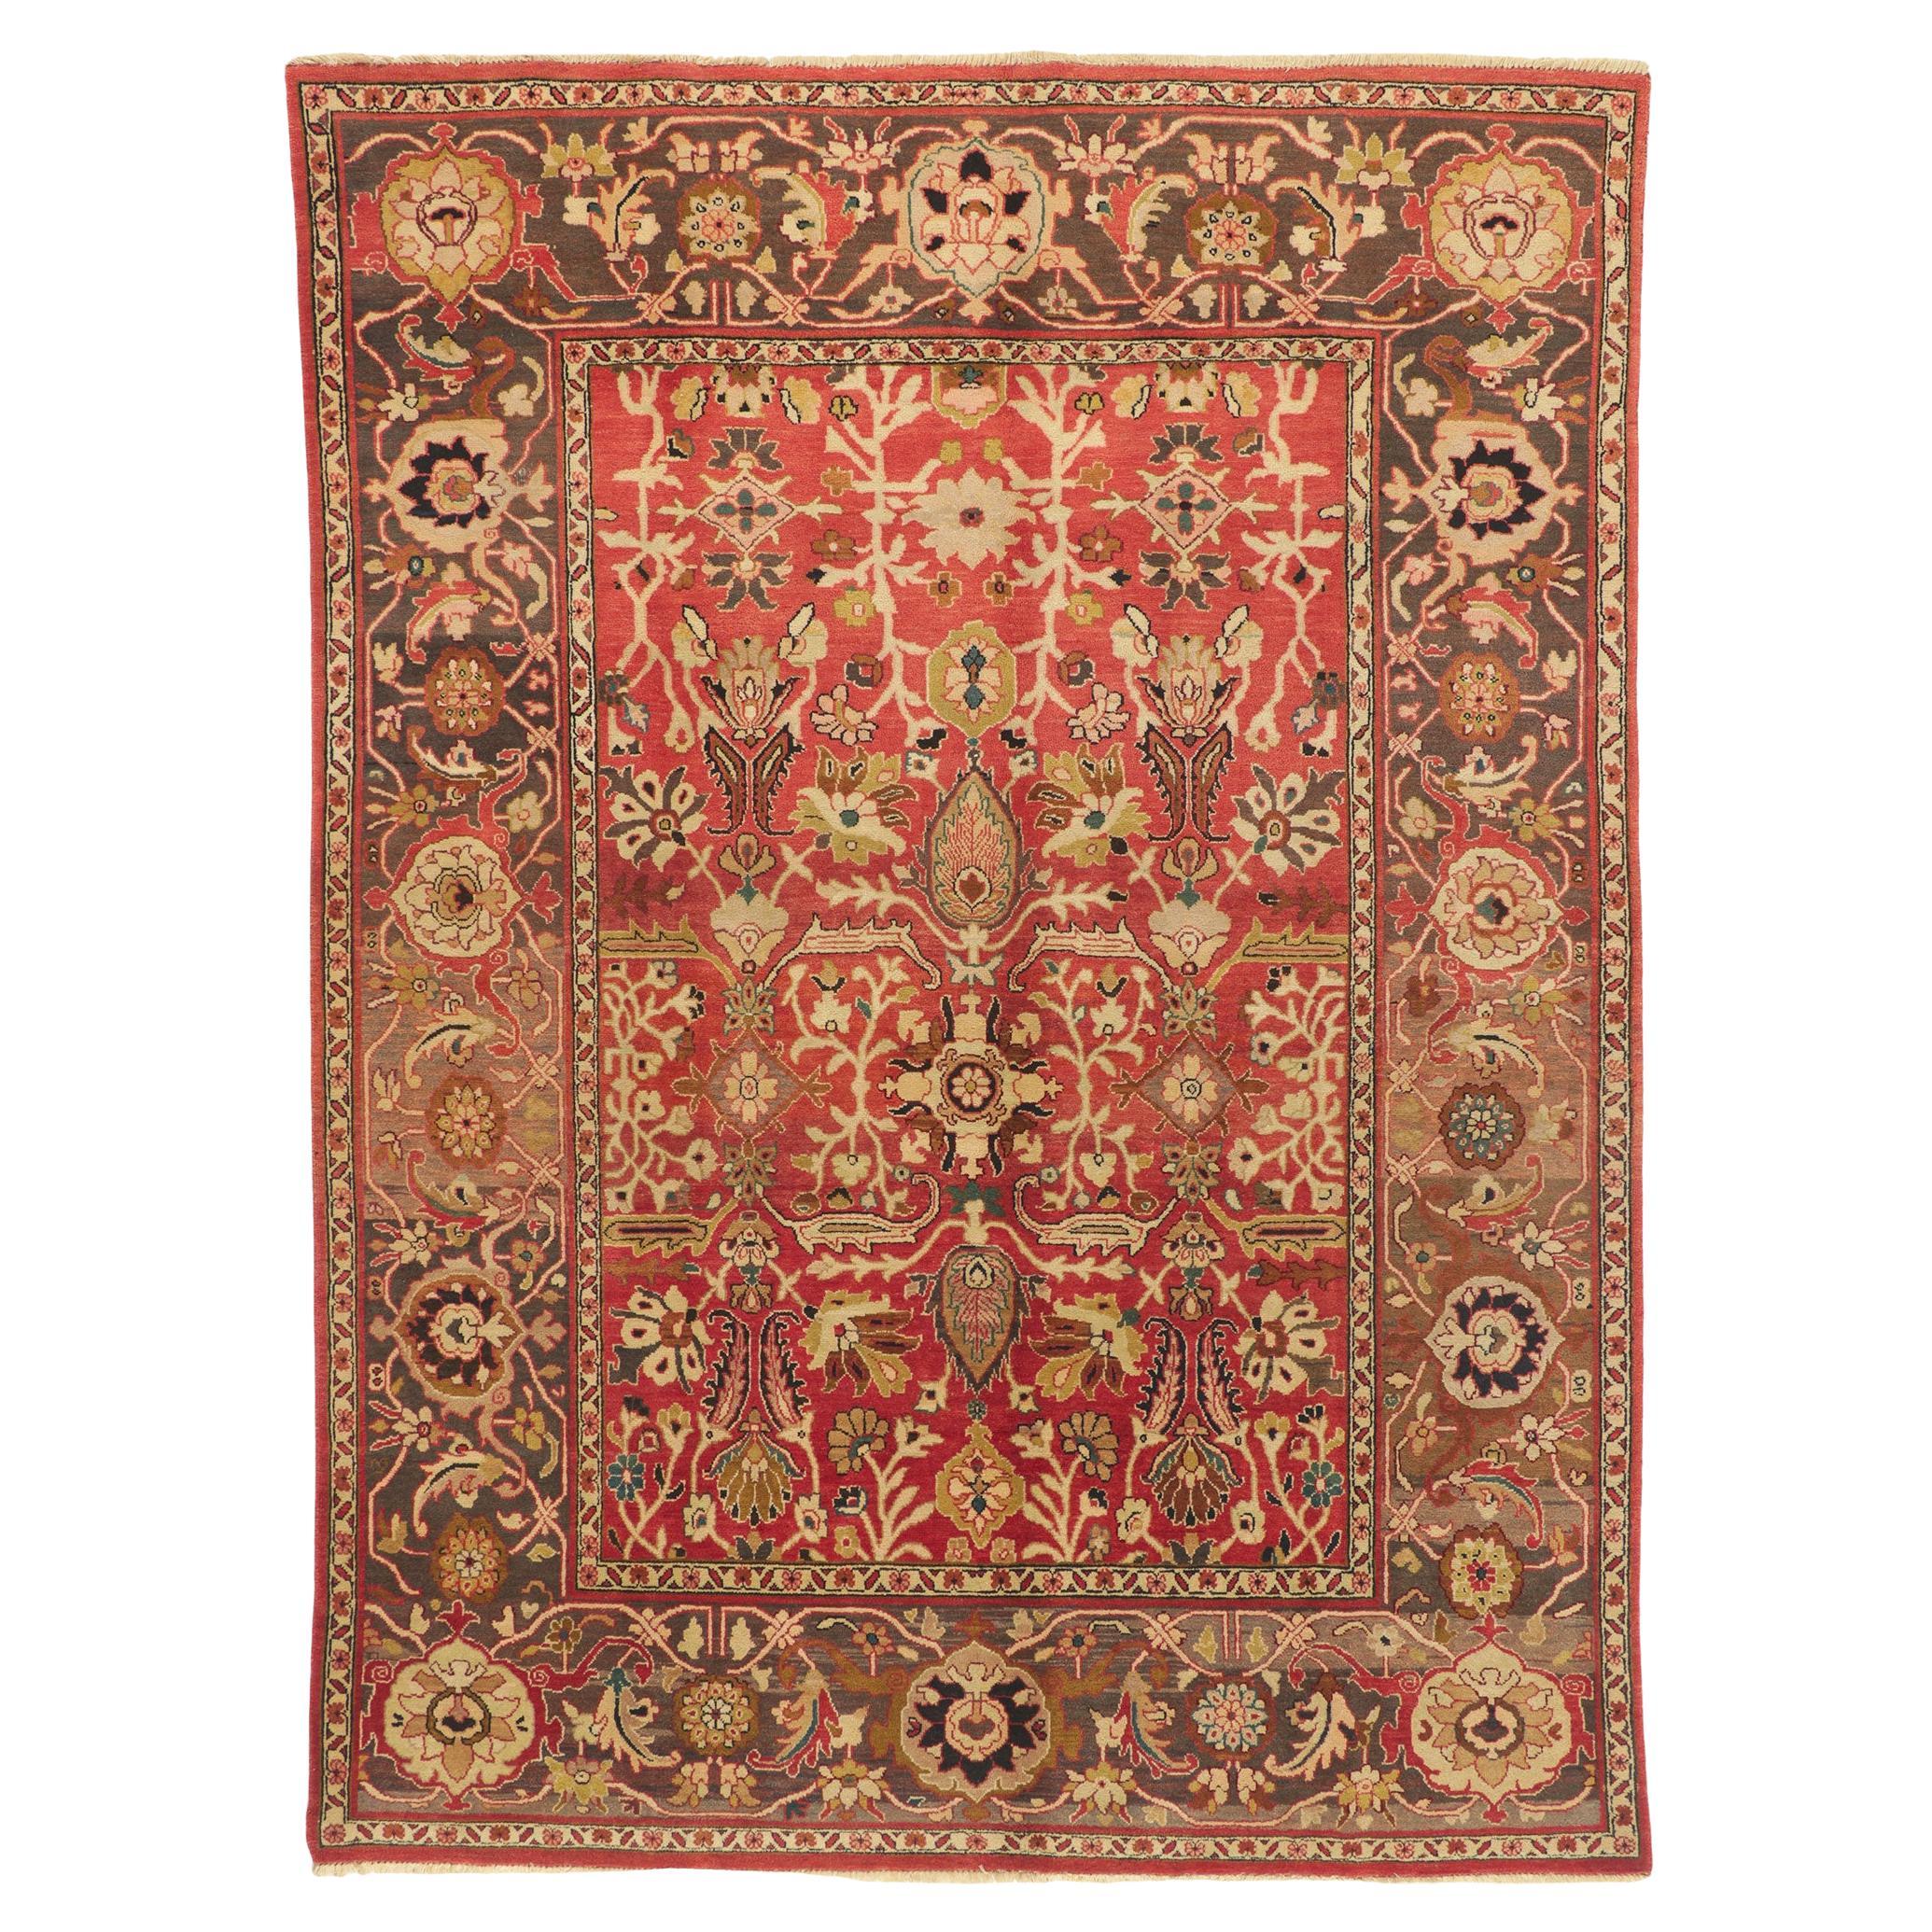 Vintage Indian Mahal Rug with Warm Earth-Tone Colors